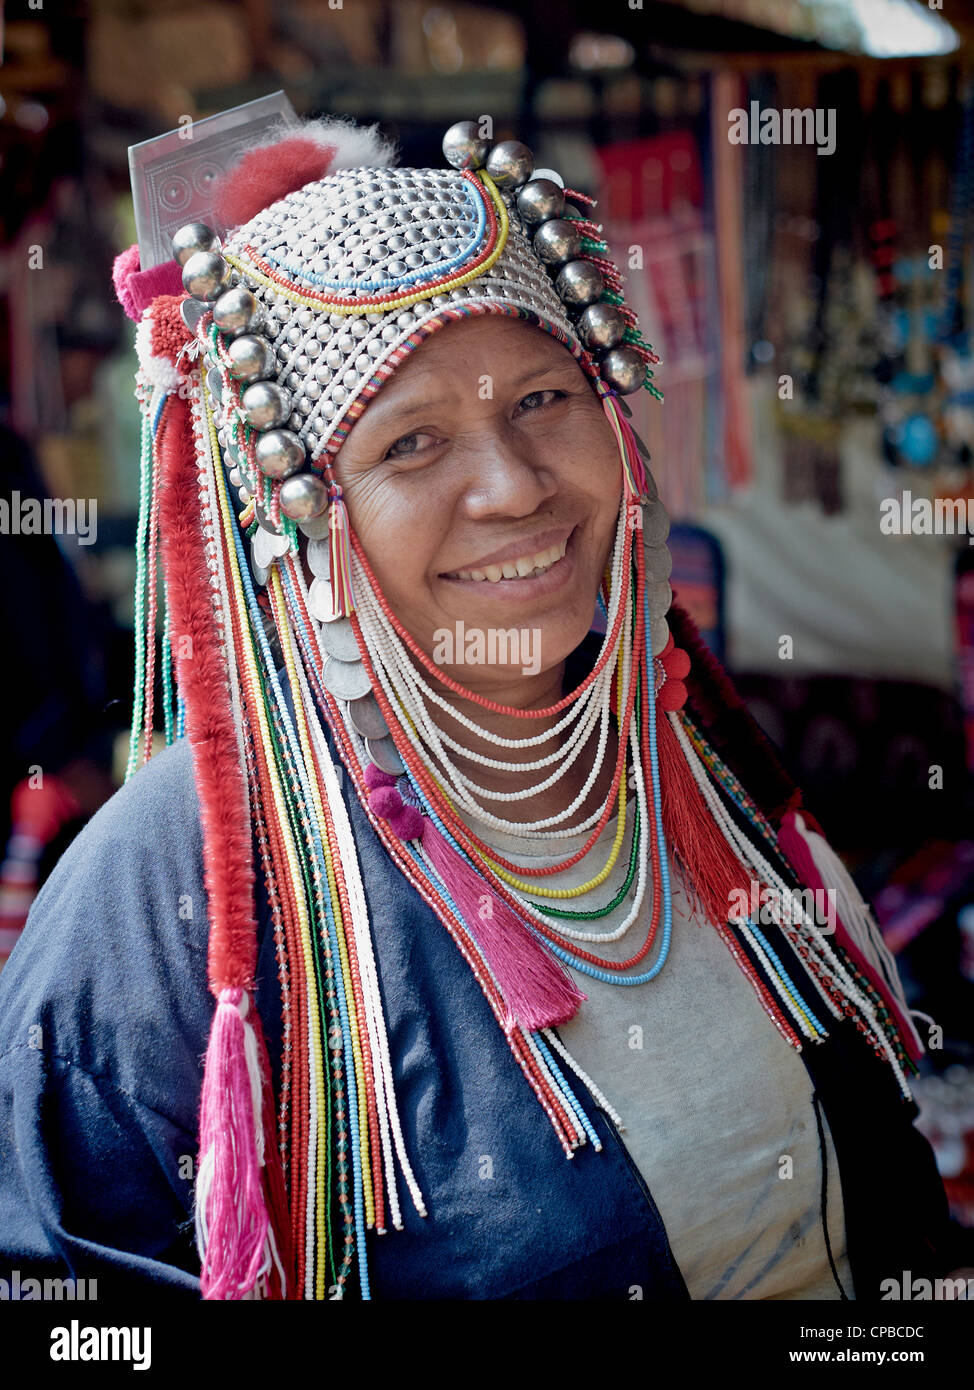 Akha hill tribe woman of Northern Thailand. Chiang Mai province. Rural Thailand people S.E. Asia. Hill tribes Stock Photo